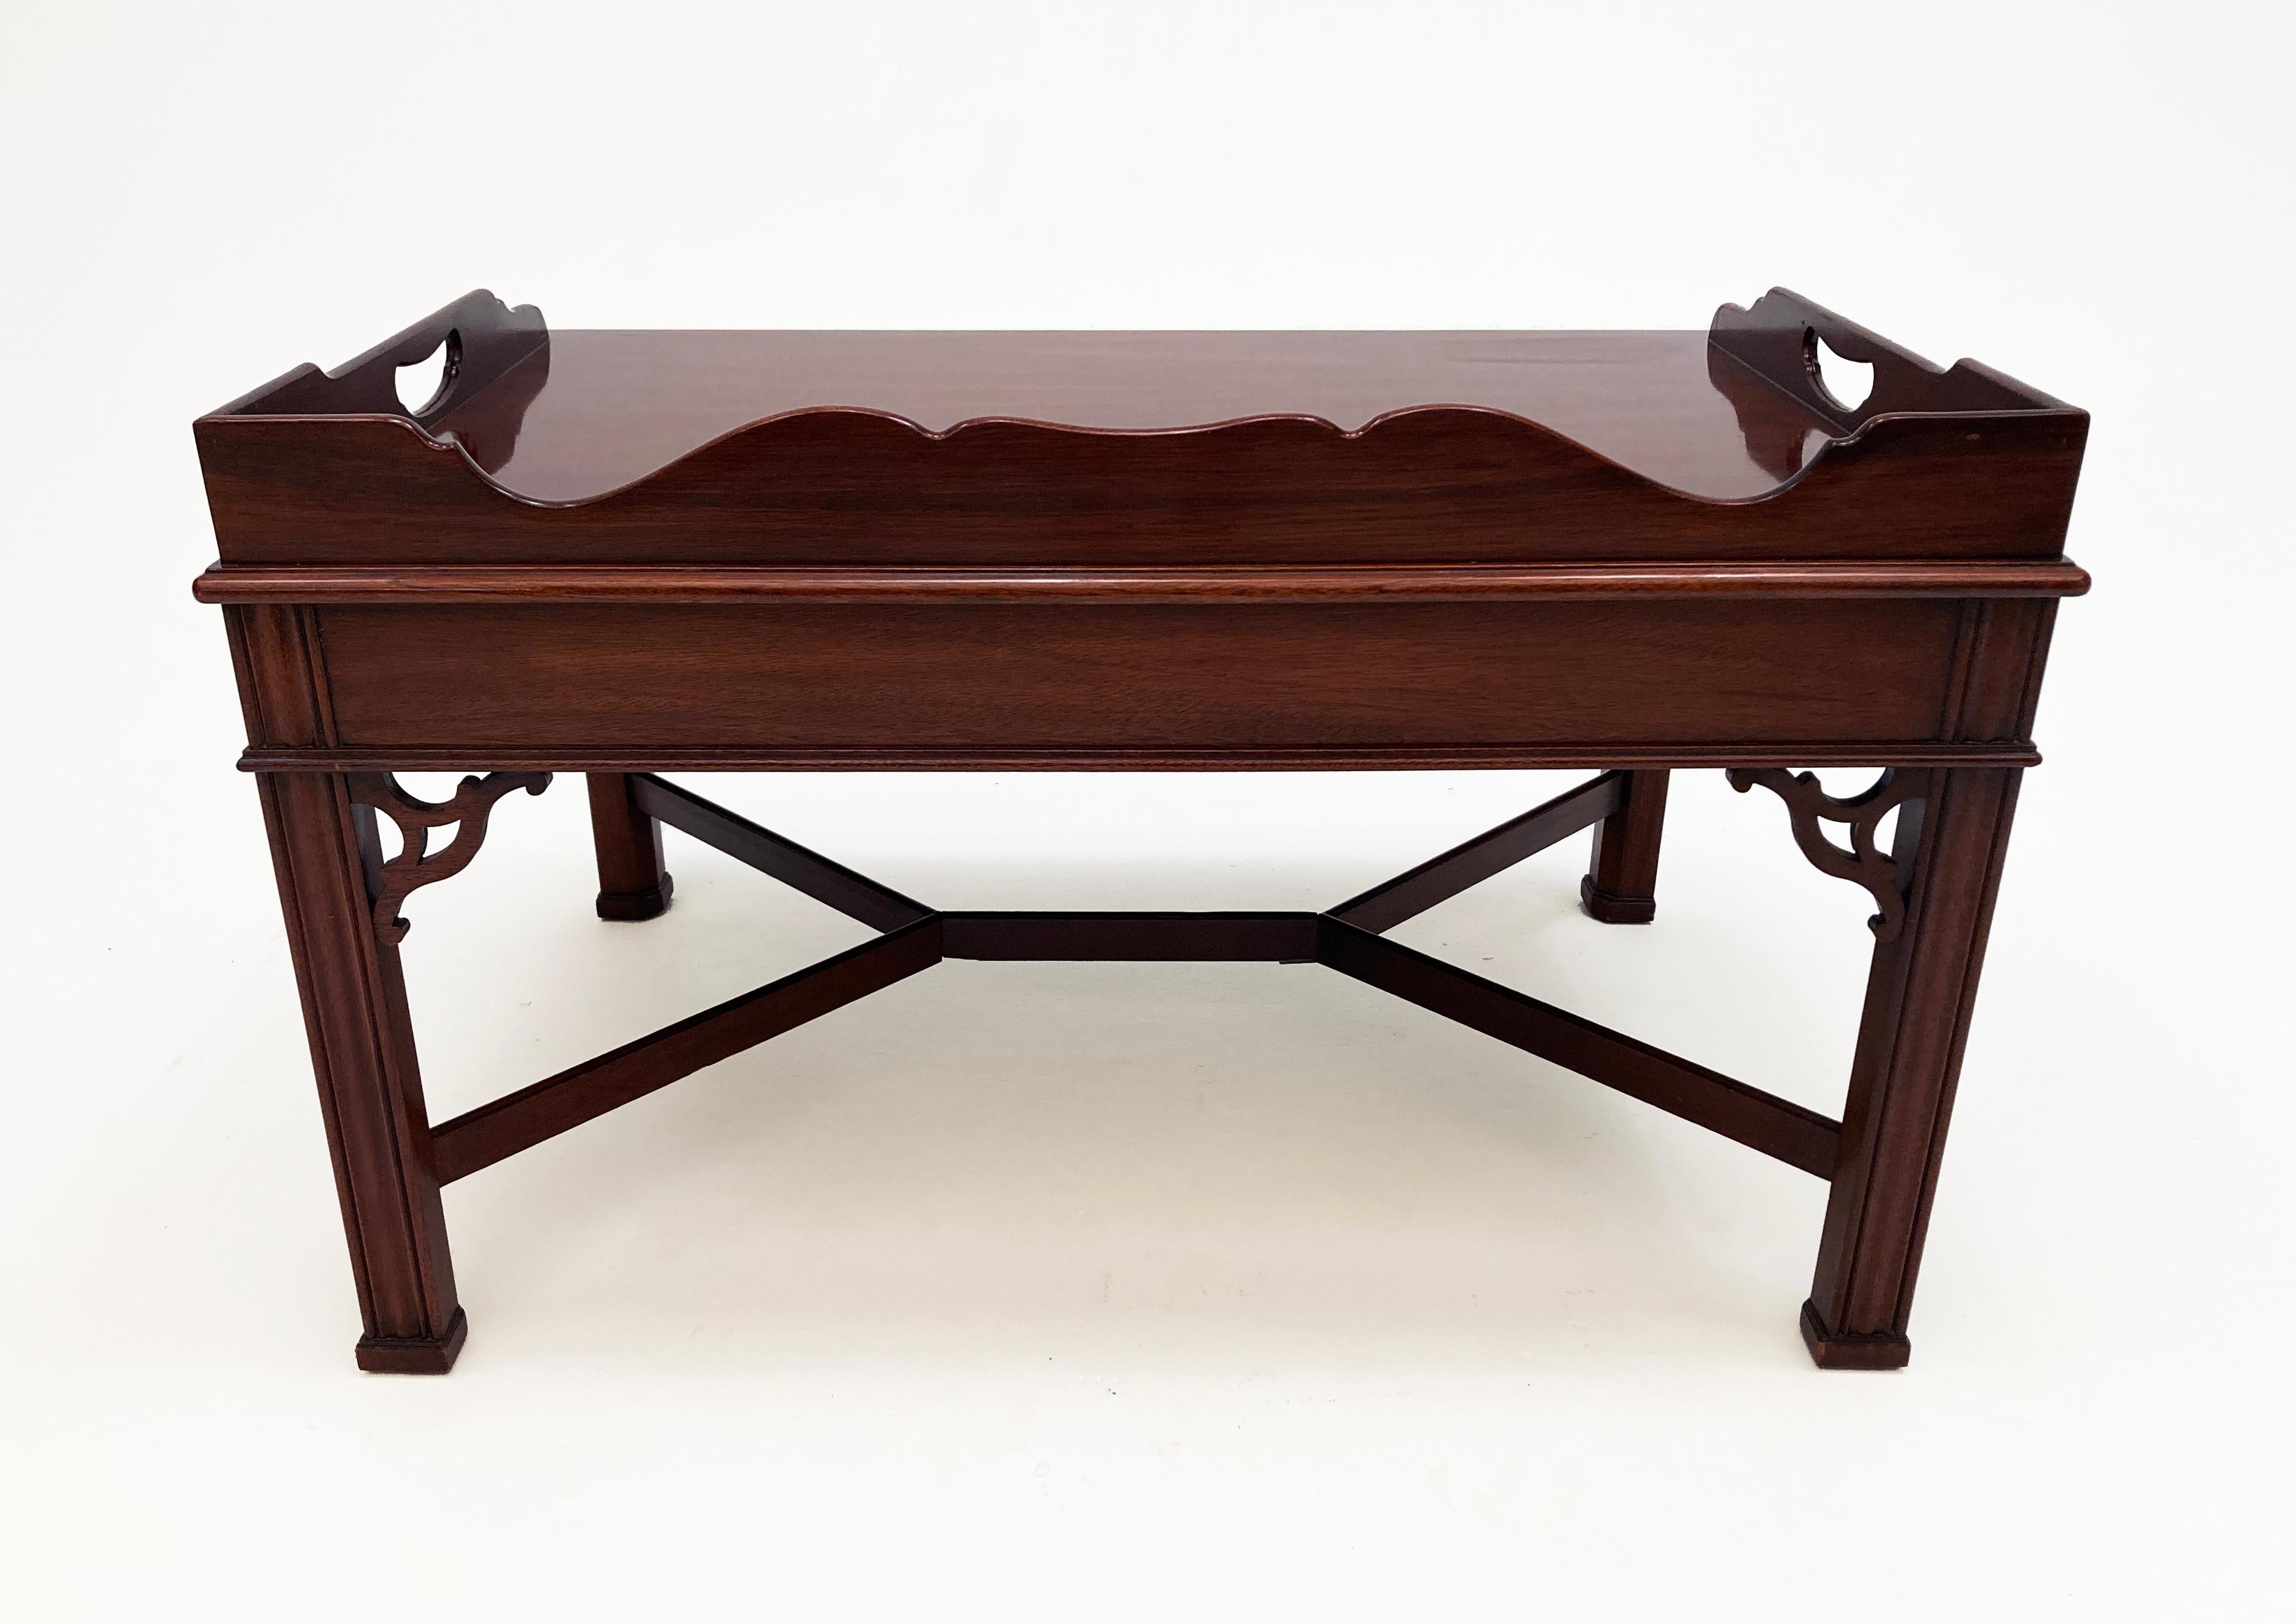 Classically designed for a diverse décor palette, this Councill Craftsman Chippendale Style Butler’s Tray Coffee Table has a beautiful scalloped gallery with butler tray handle openings in dark mahogany finish. The table has canted corners, reeded